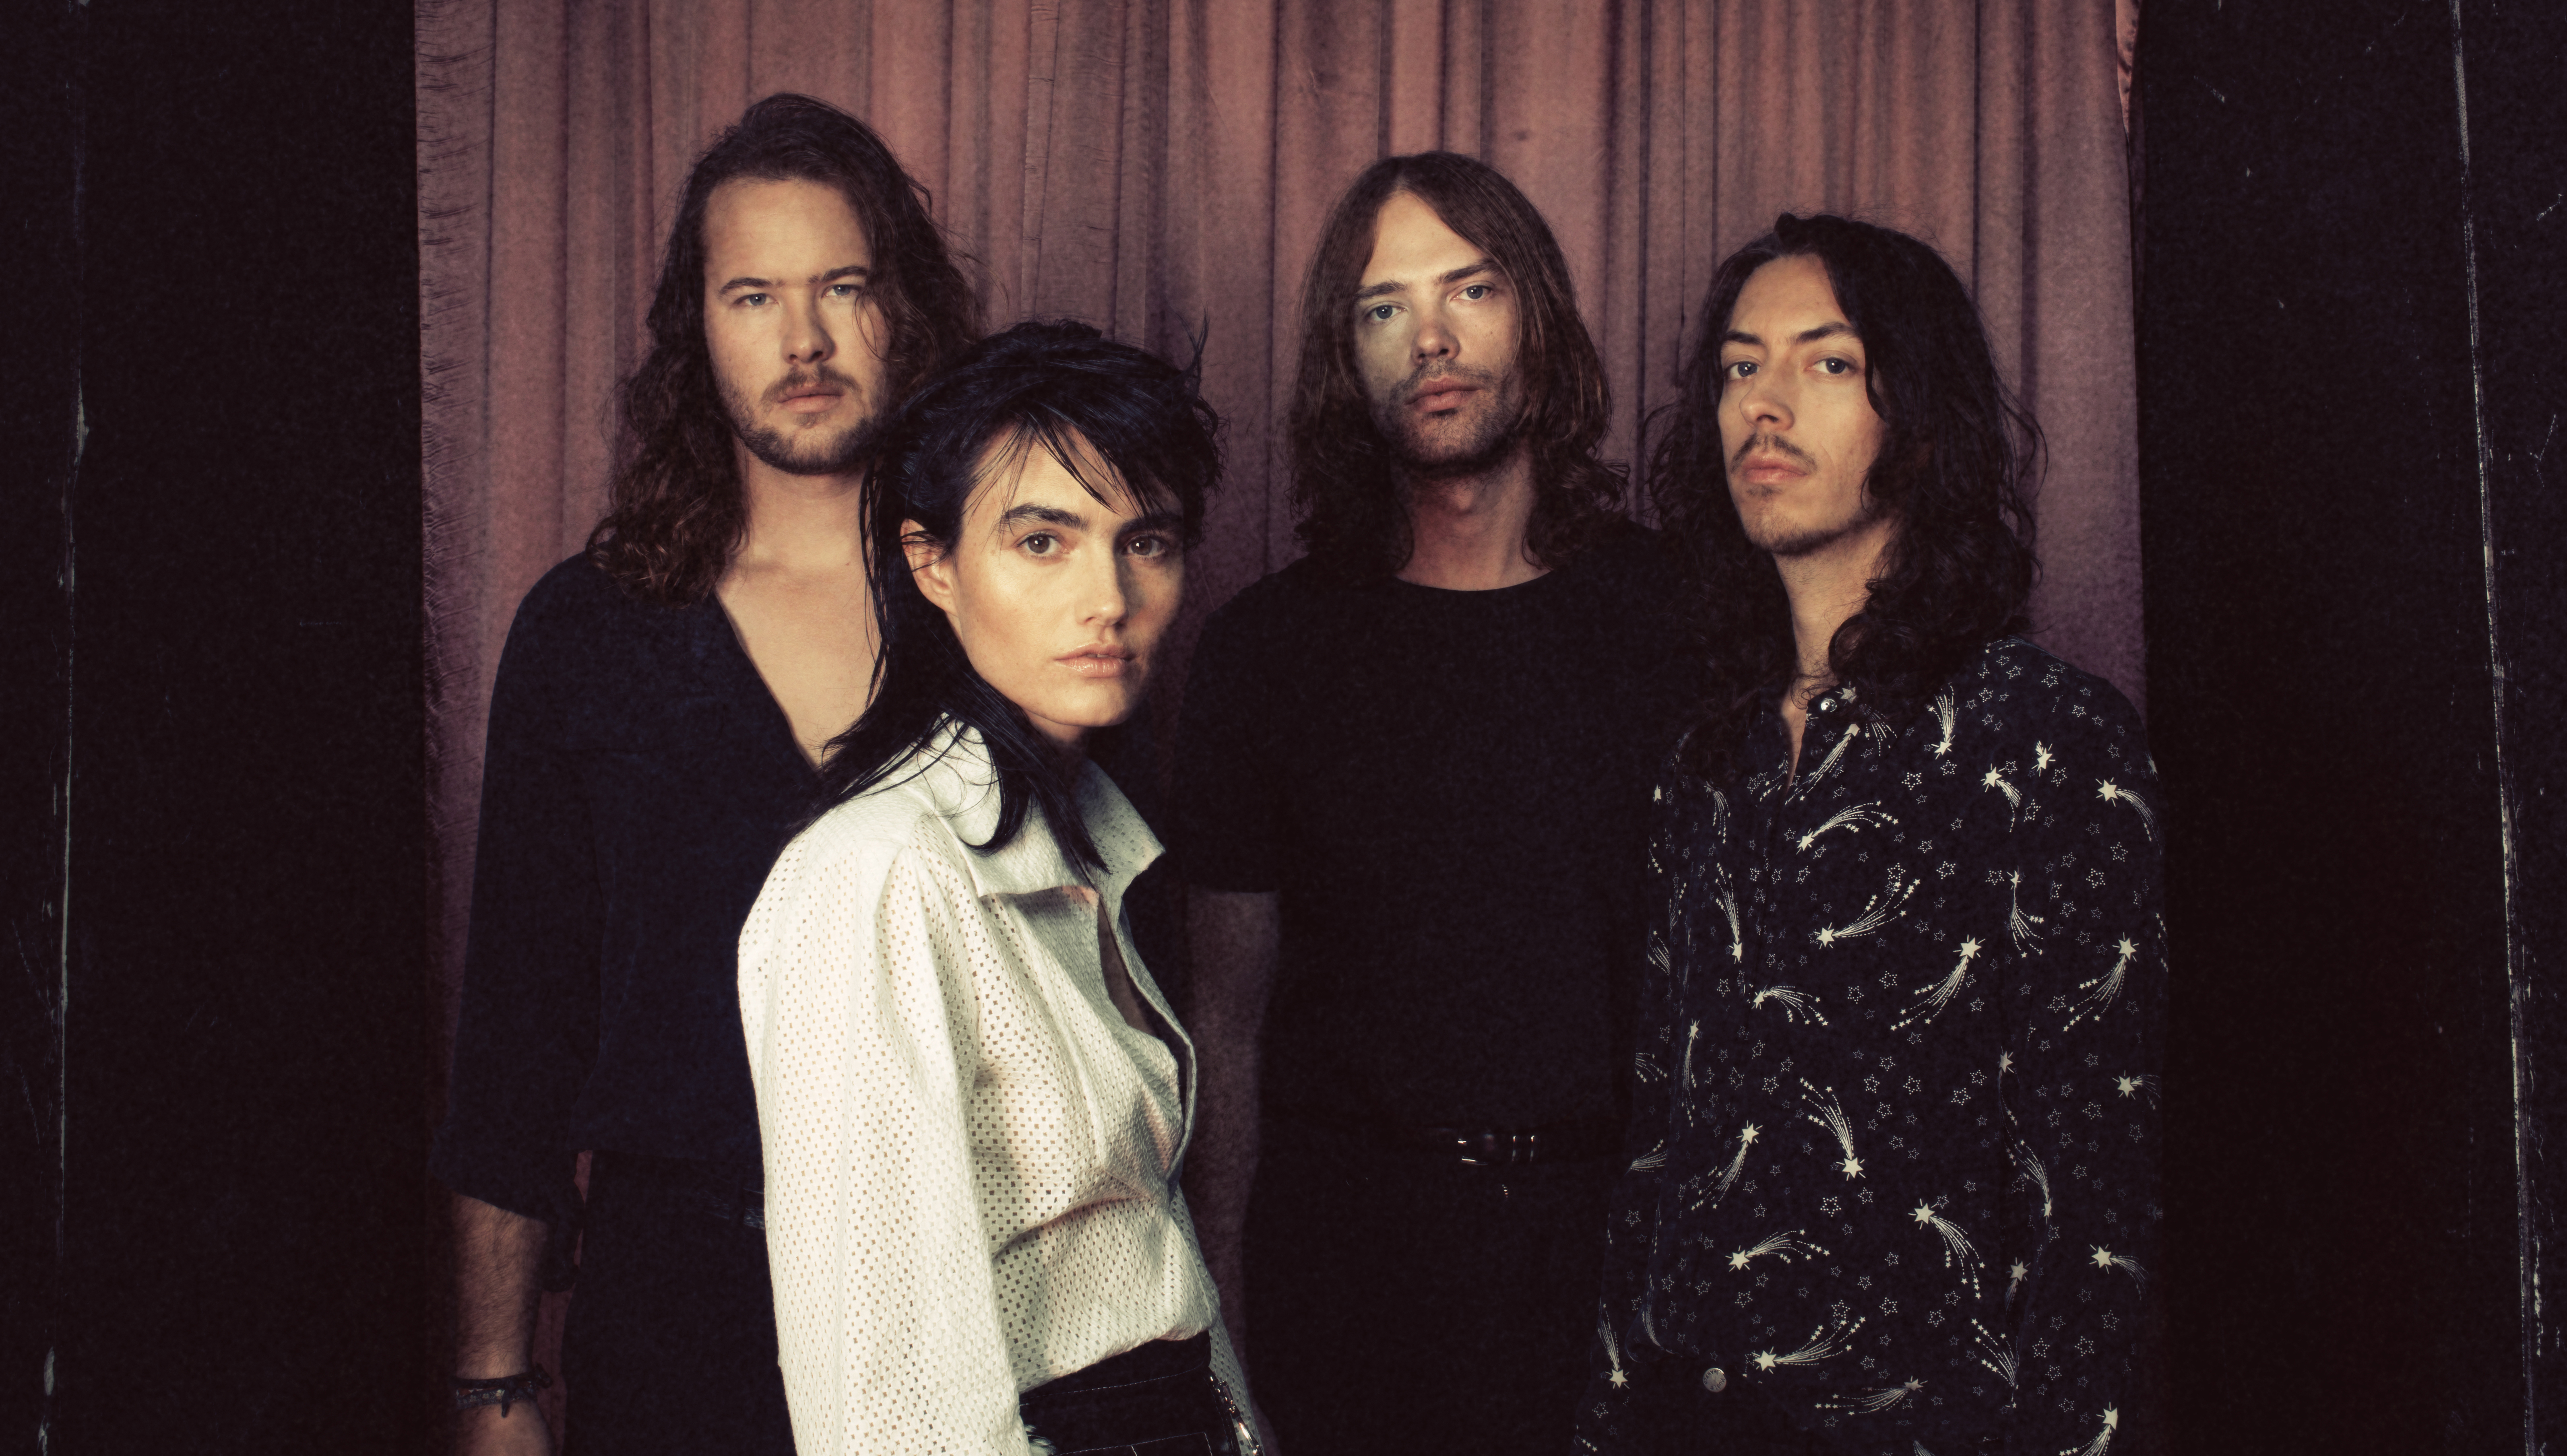 Home truths: Izzi Manfredi on why The Preatures’ latest single should start a conversation